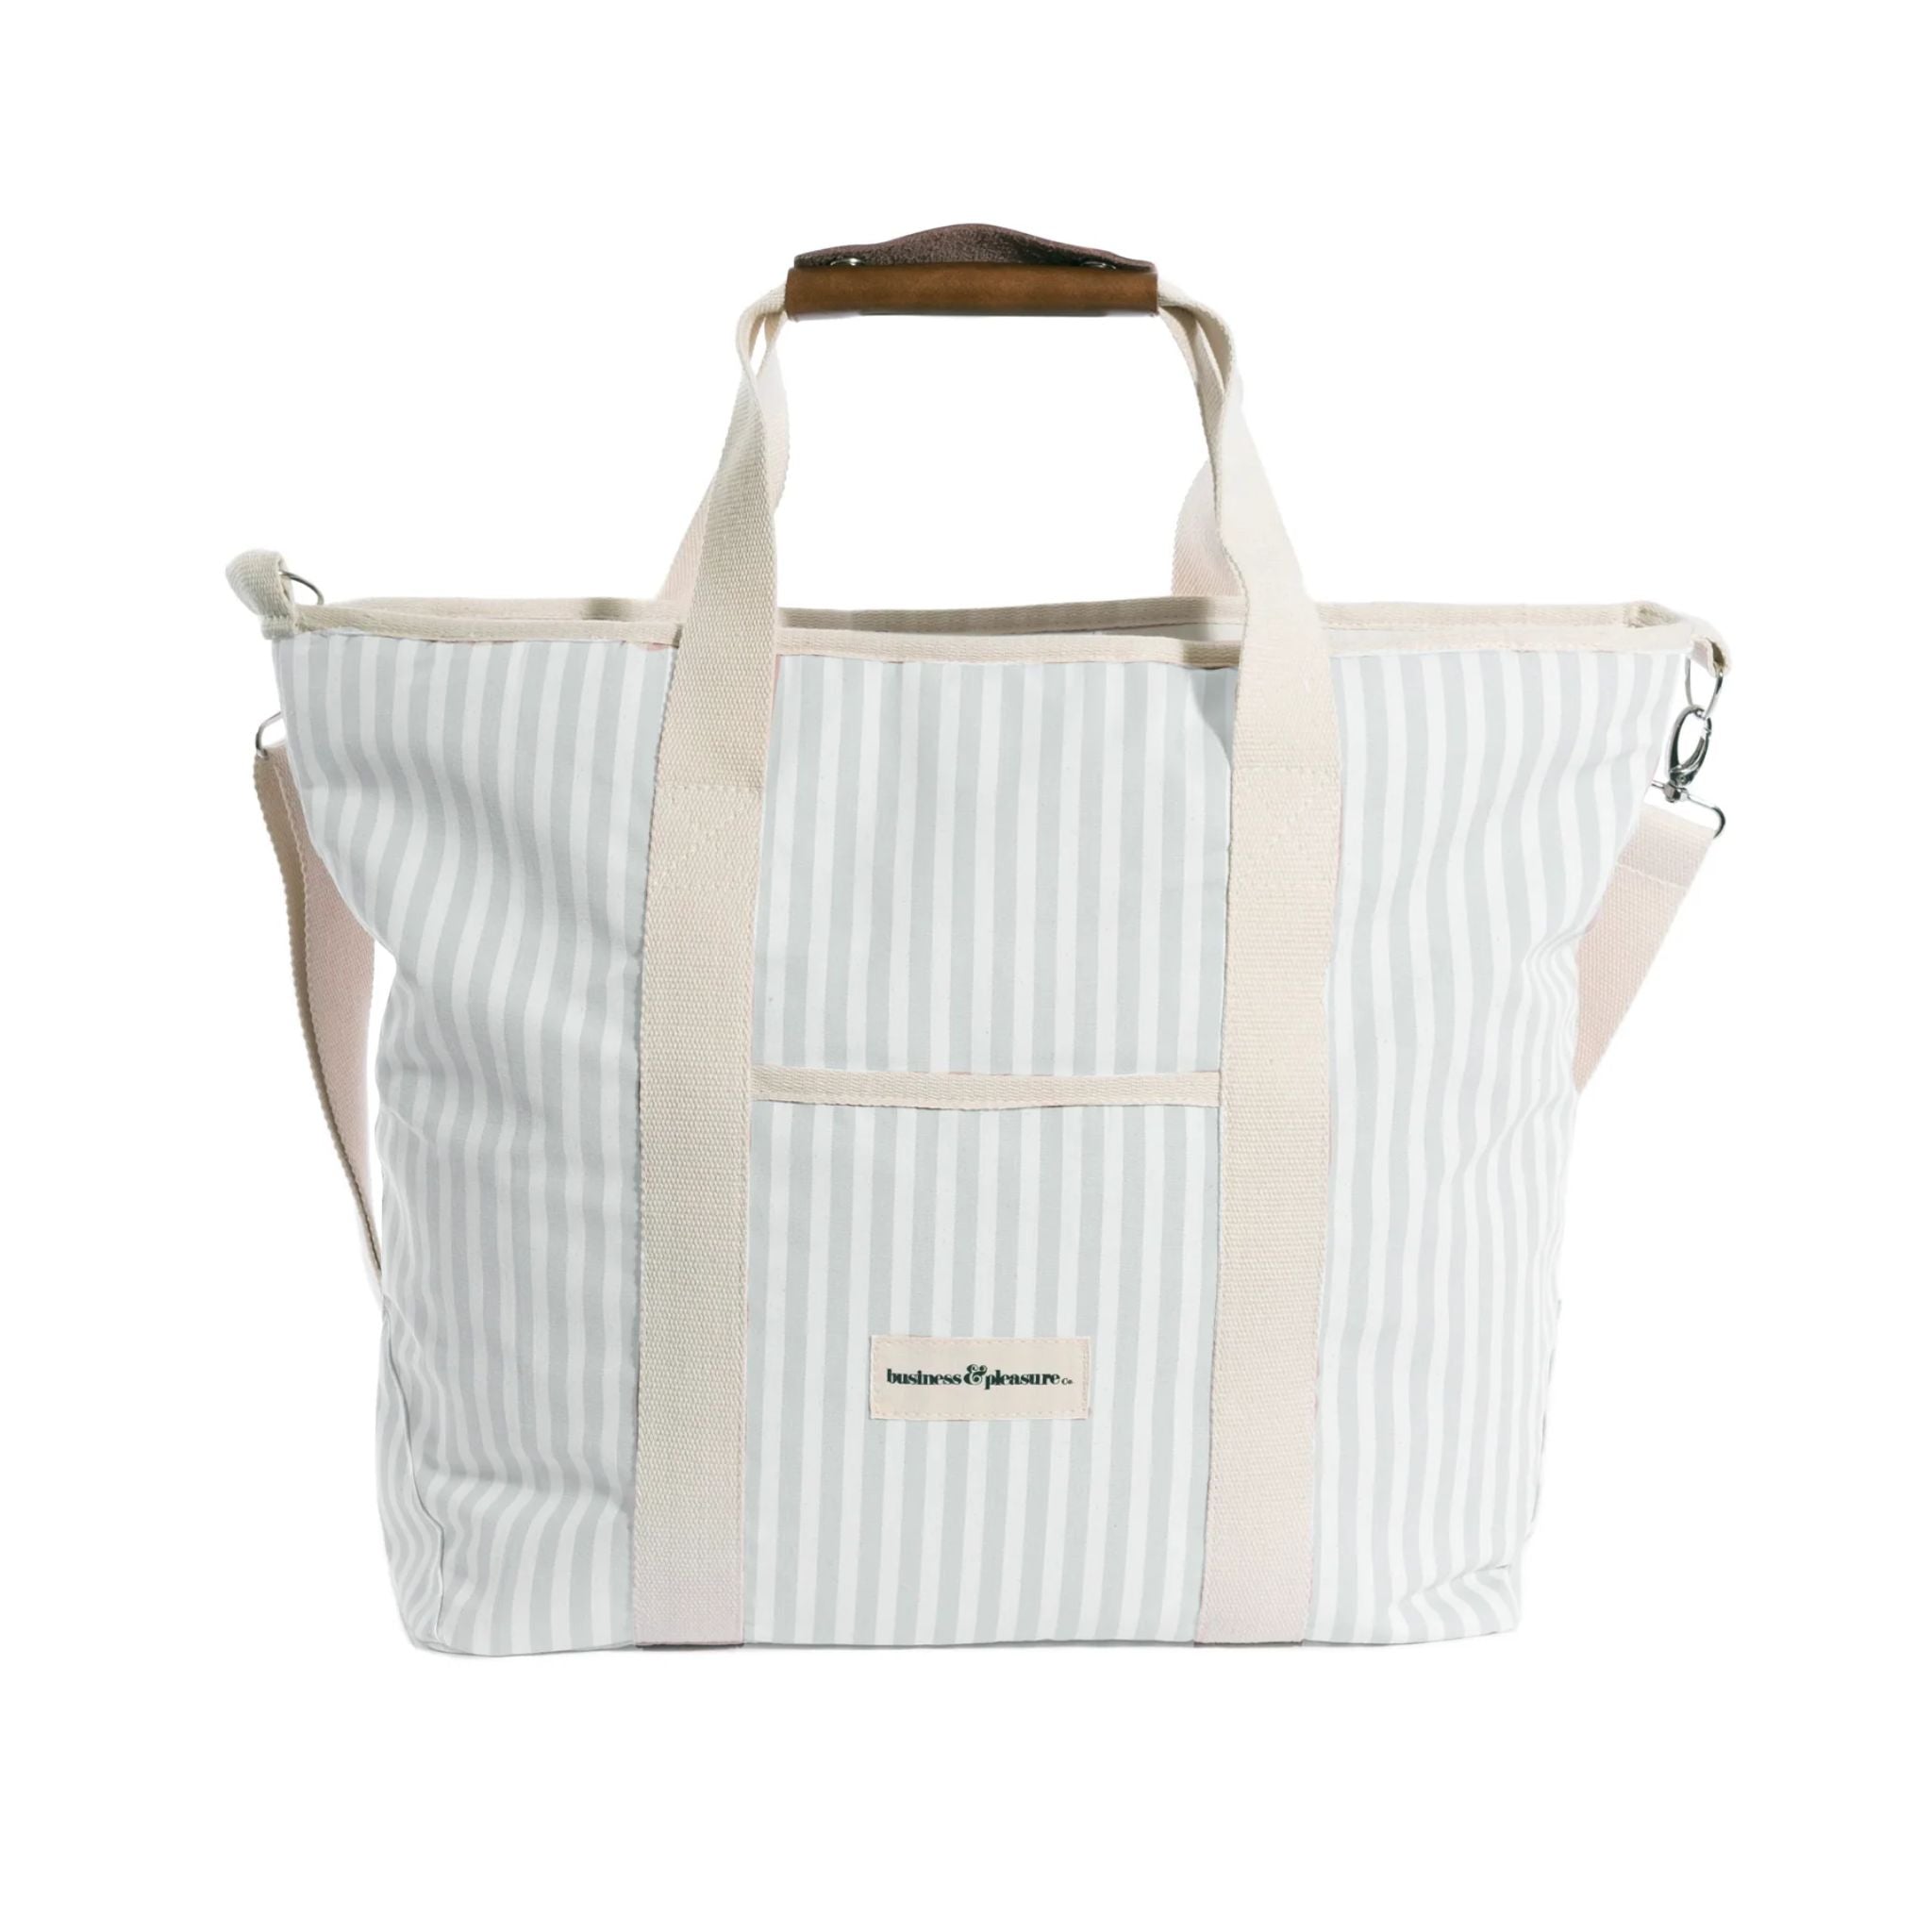 Business And Pleasure Co Cooler Tote Bag - Sage Stripe